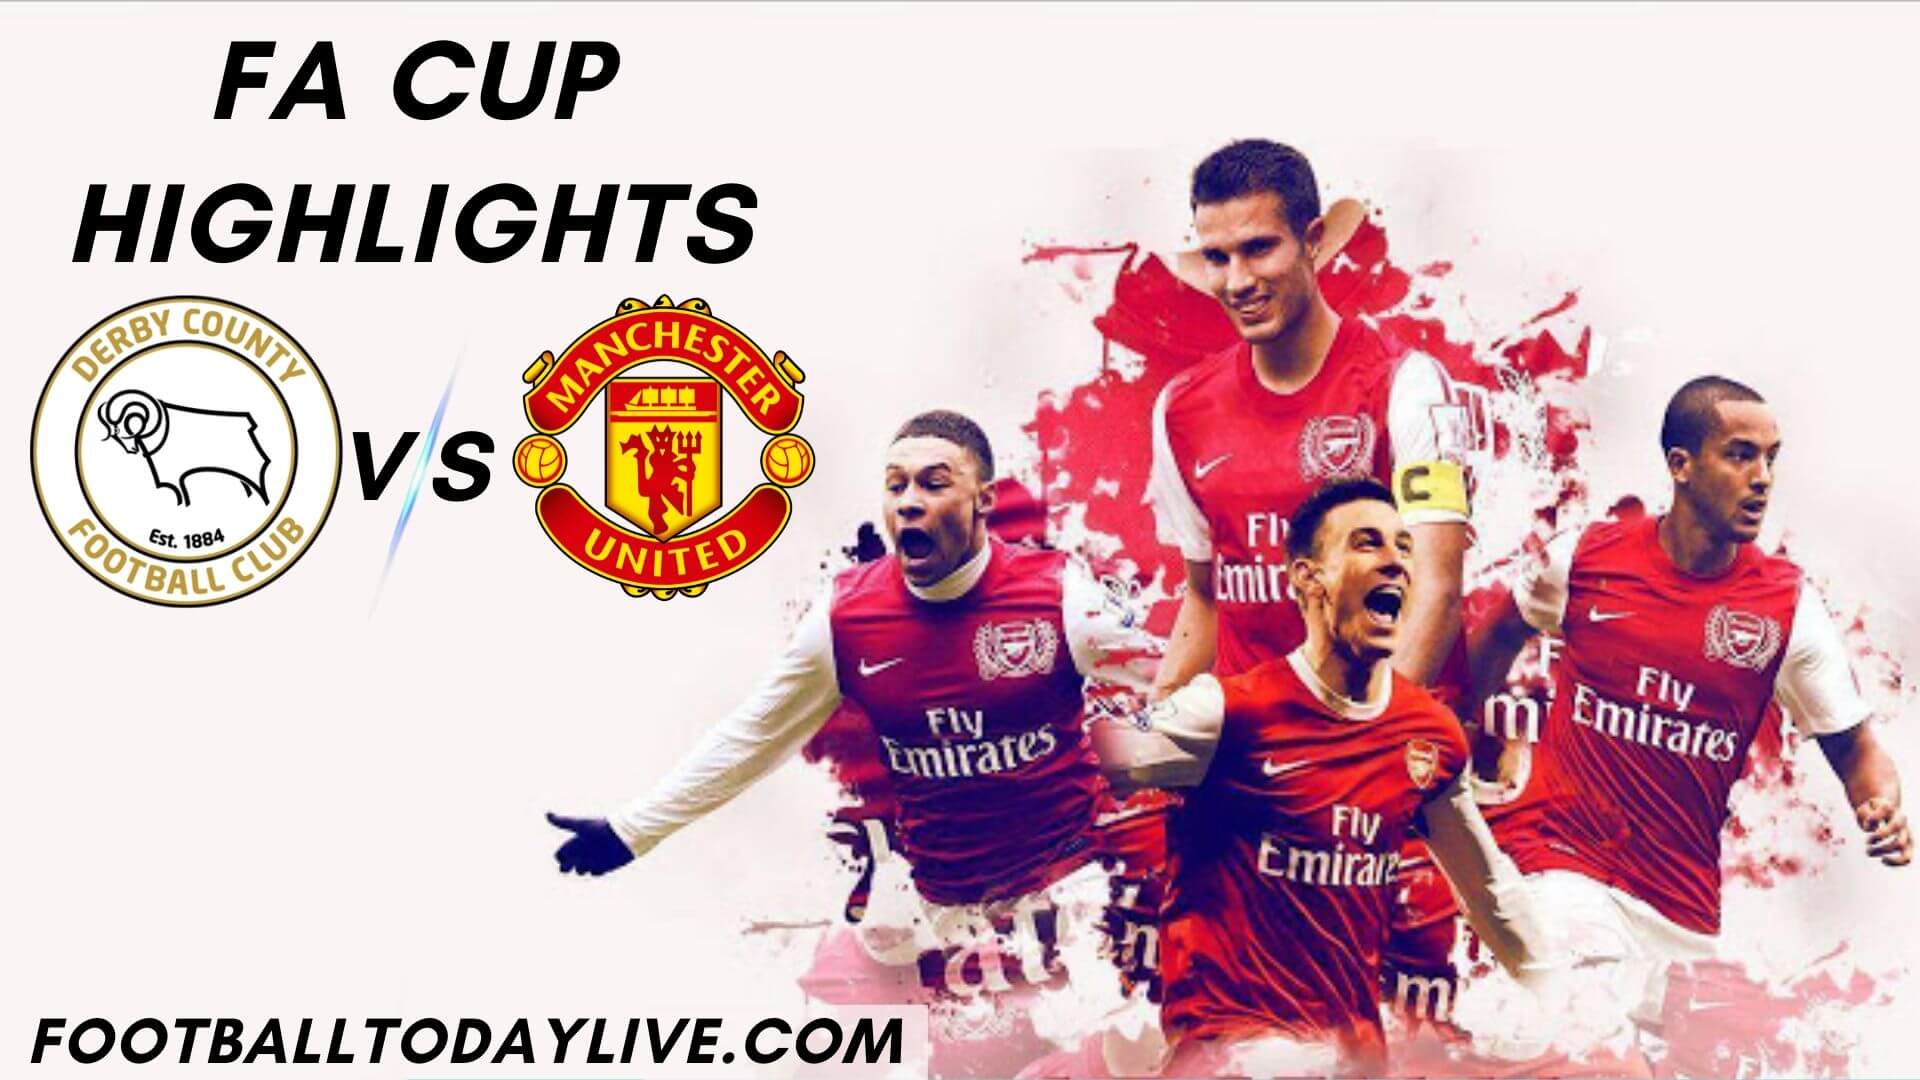 Derby County Vs Manchester United Highlights Rd 5 FA Cup 2020